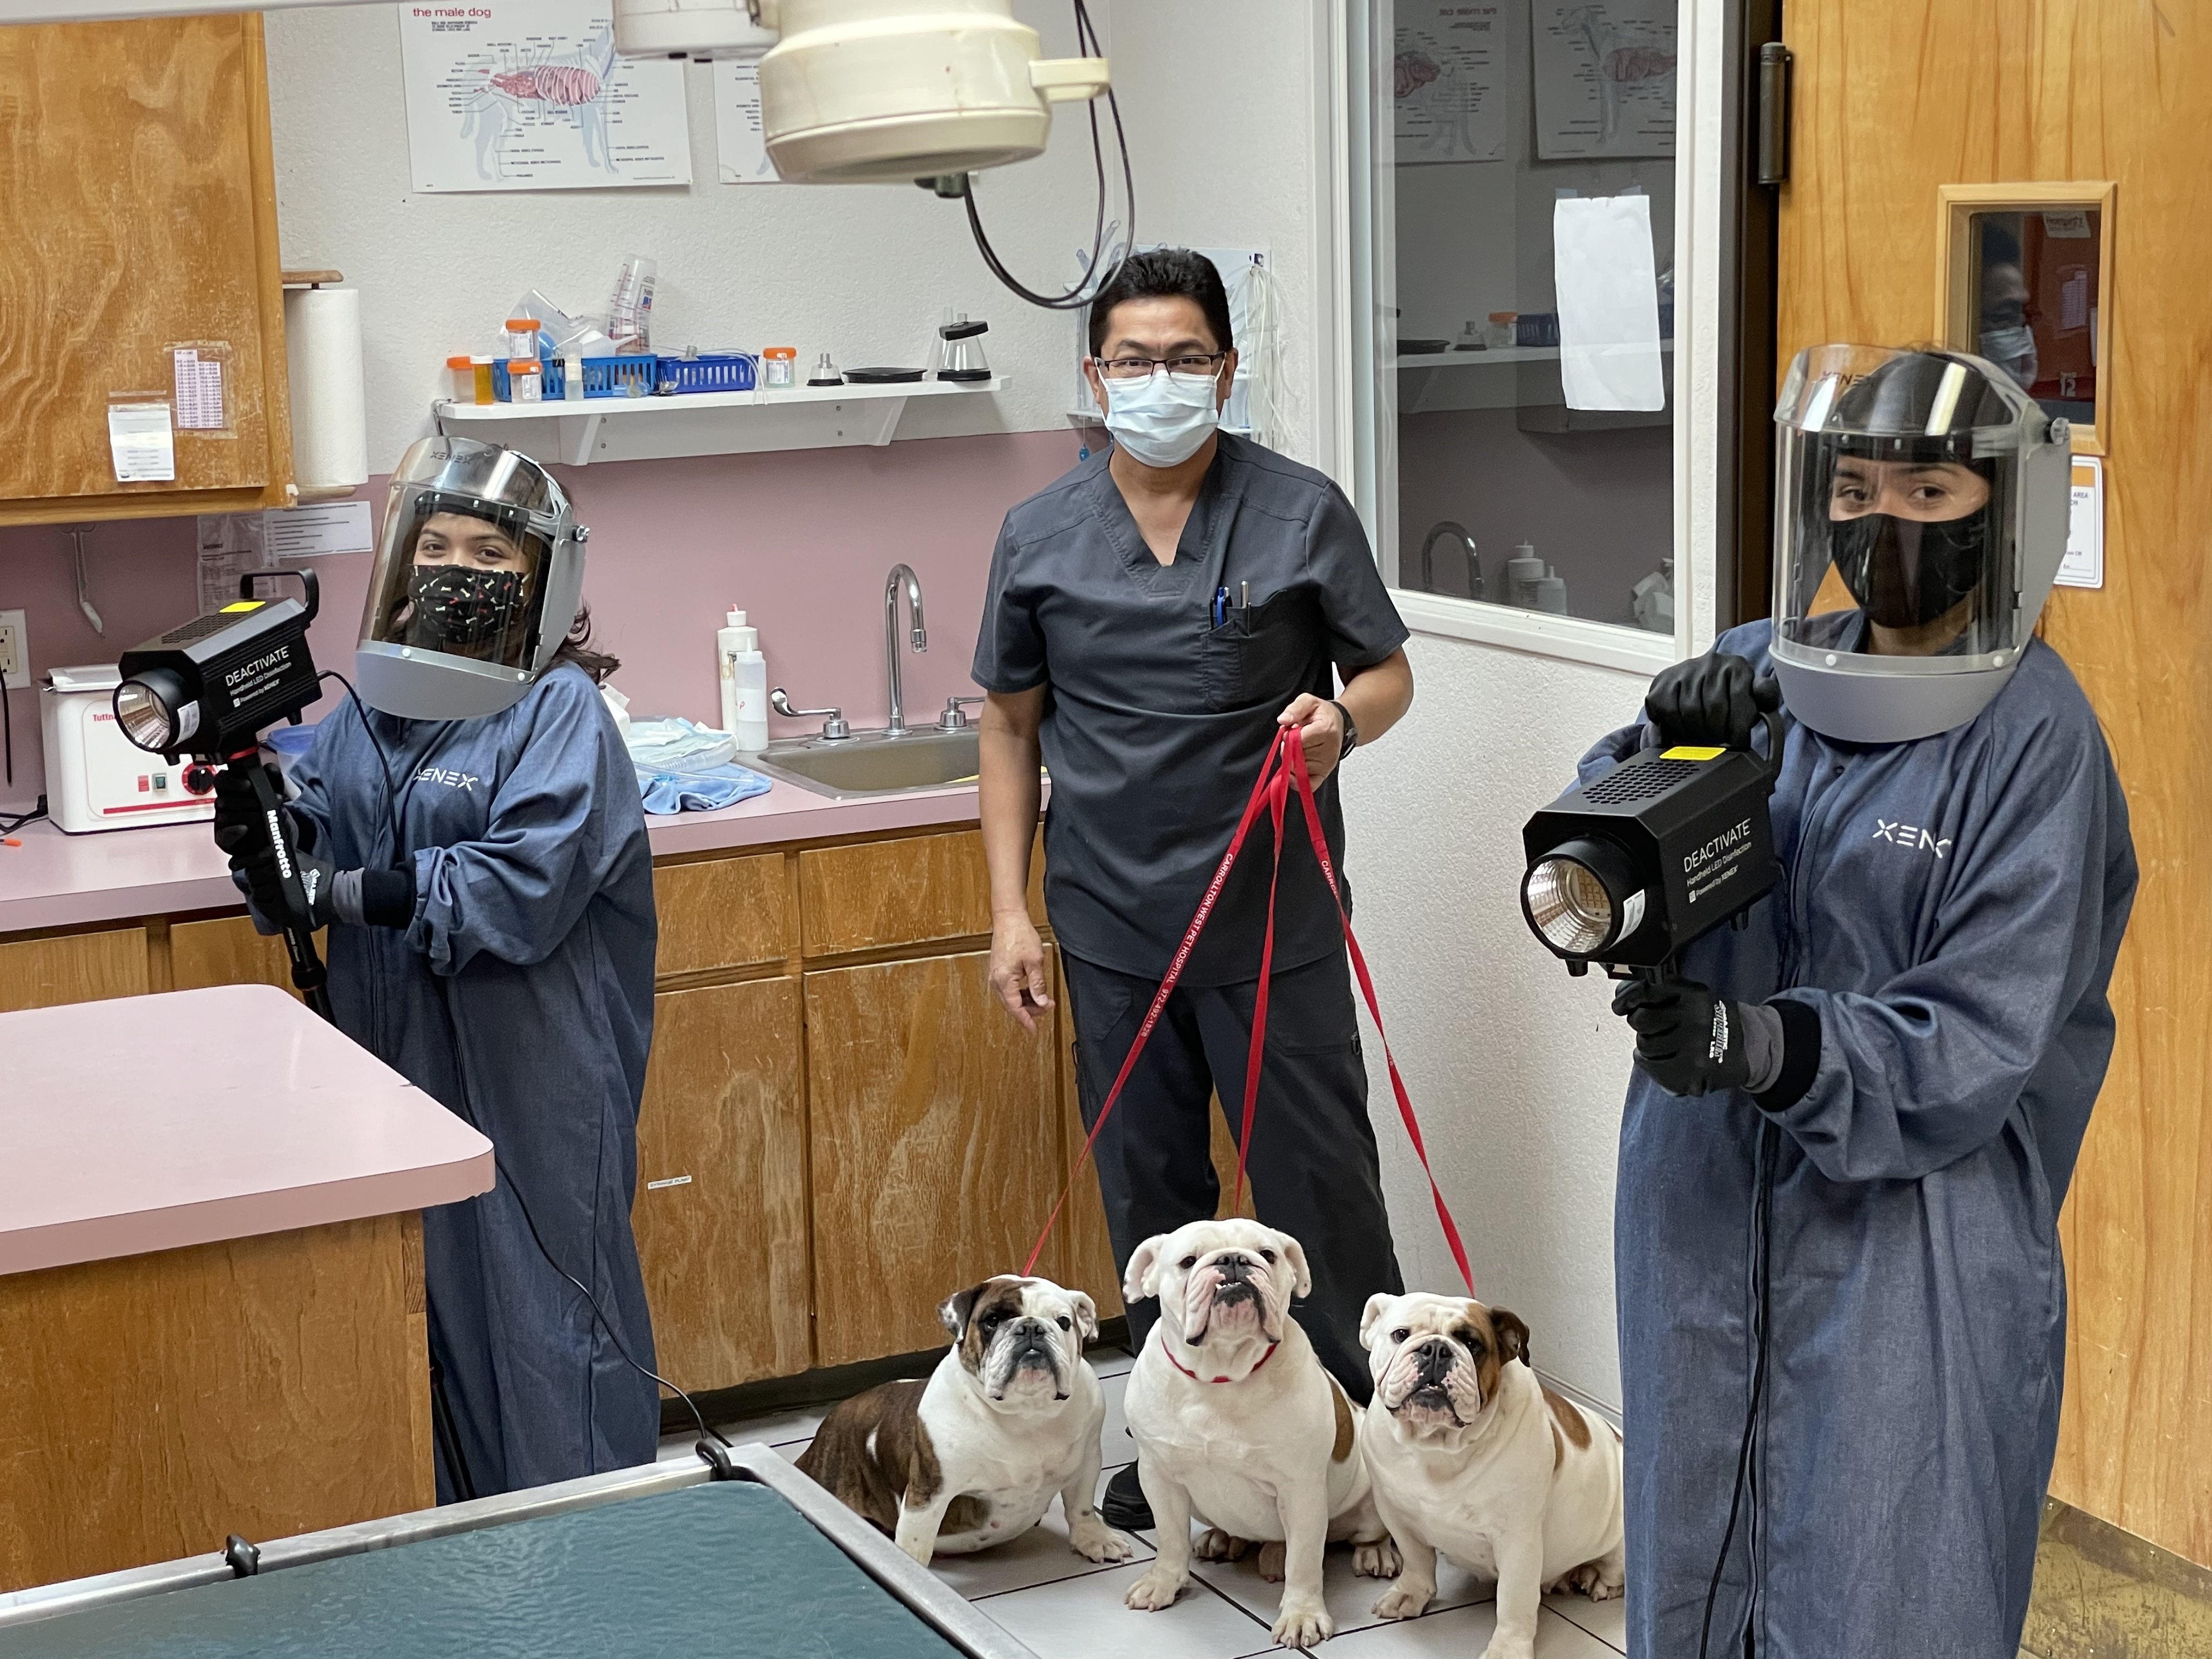 Carrollton West Pet Hospital is World's First Veterinary Hospital to Deploy  Xenex Handheld Germ-Zapping Device | Business Wire